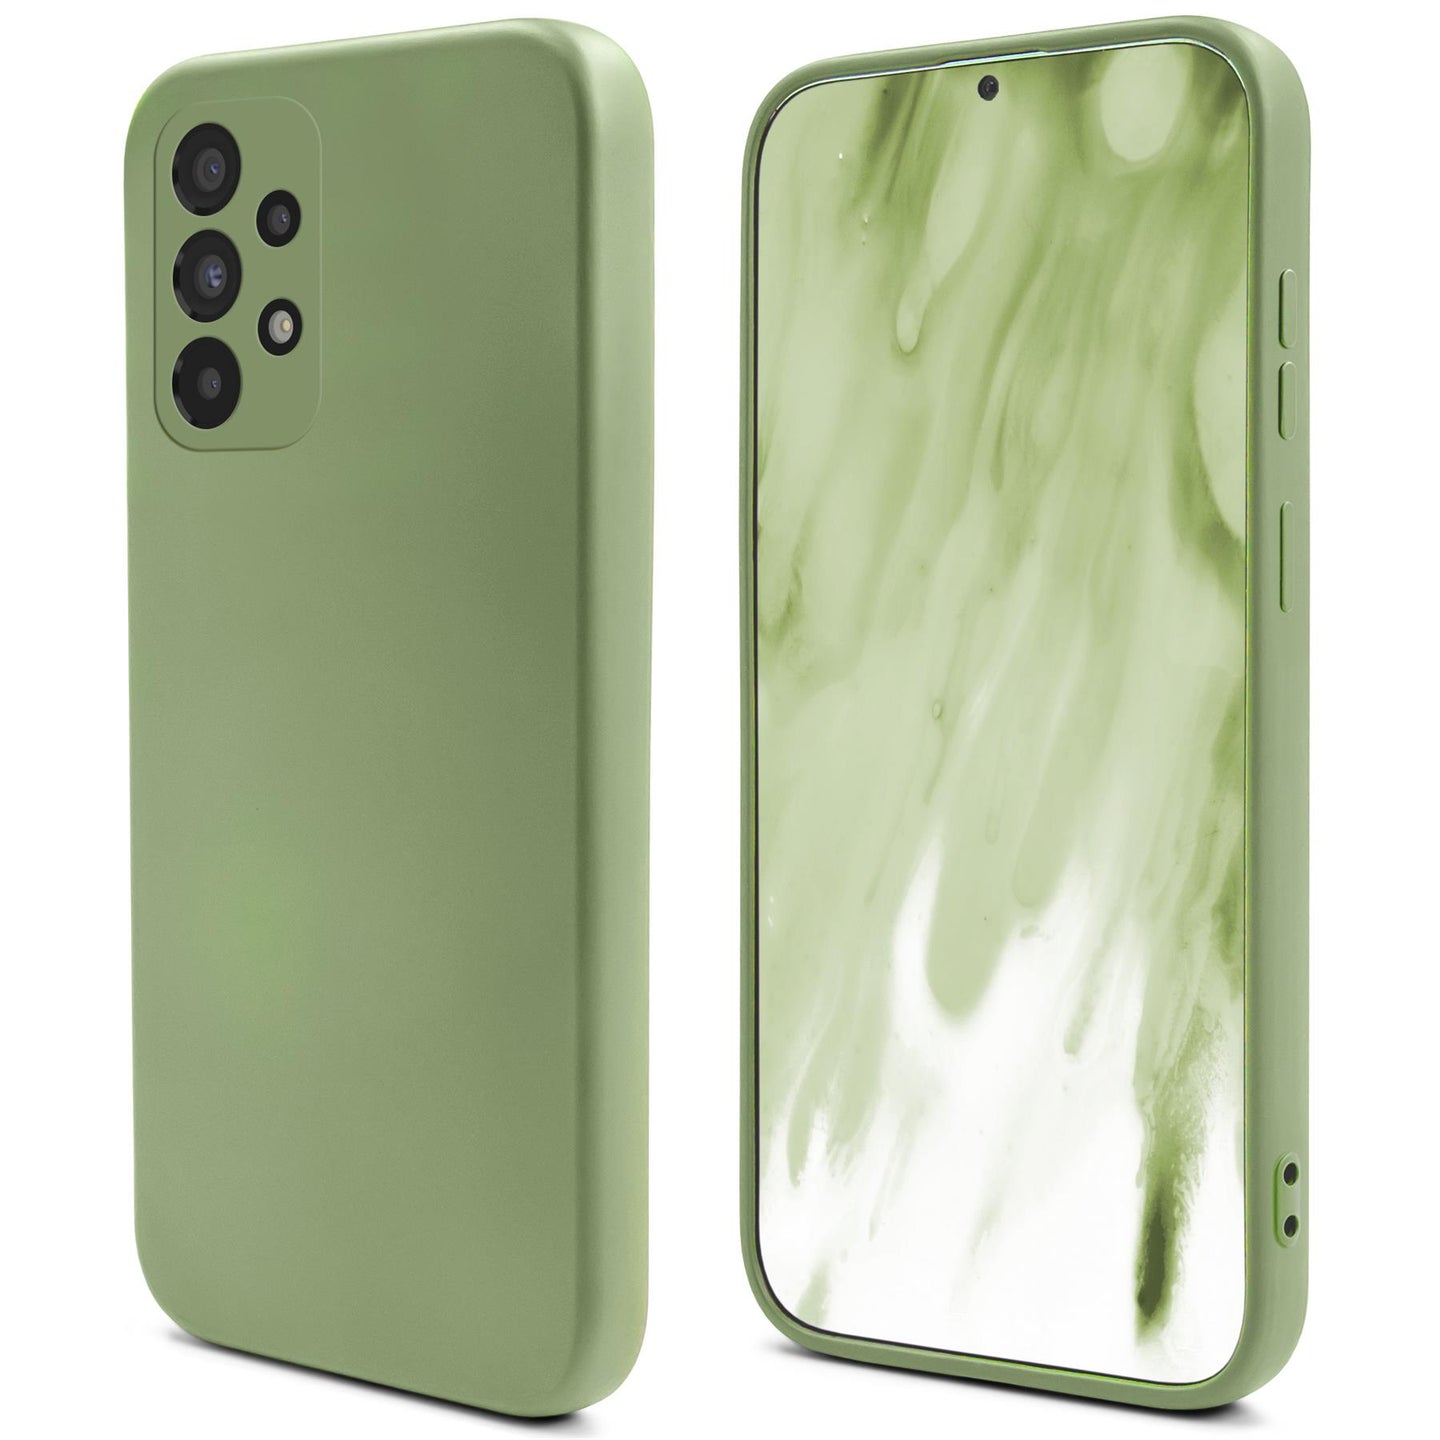 Moozy Lifestyle. Designed for Samsung A52, Samsung A52 5G Case, Mint green - Liquid Silicone Lightweight Cover with Matte Finish and Soft Microfiber Lining, Premium Silicone Case